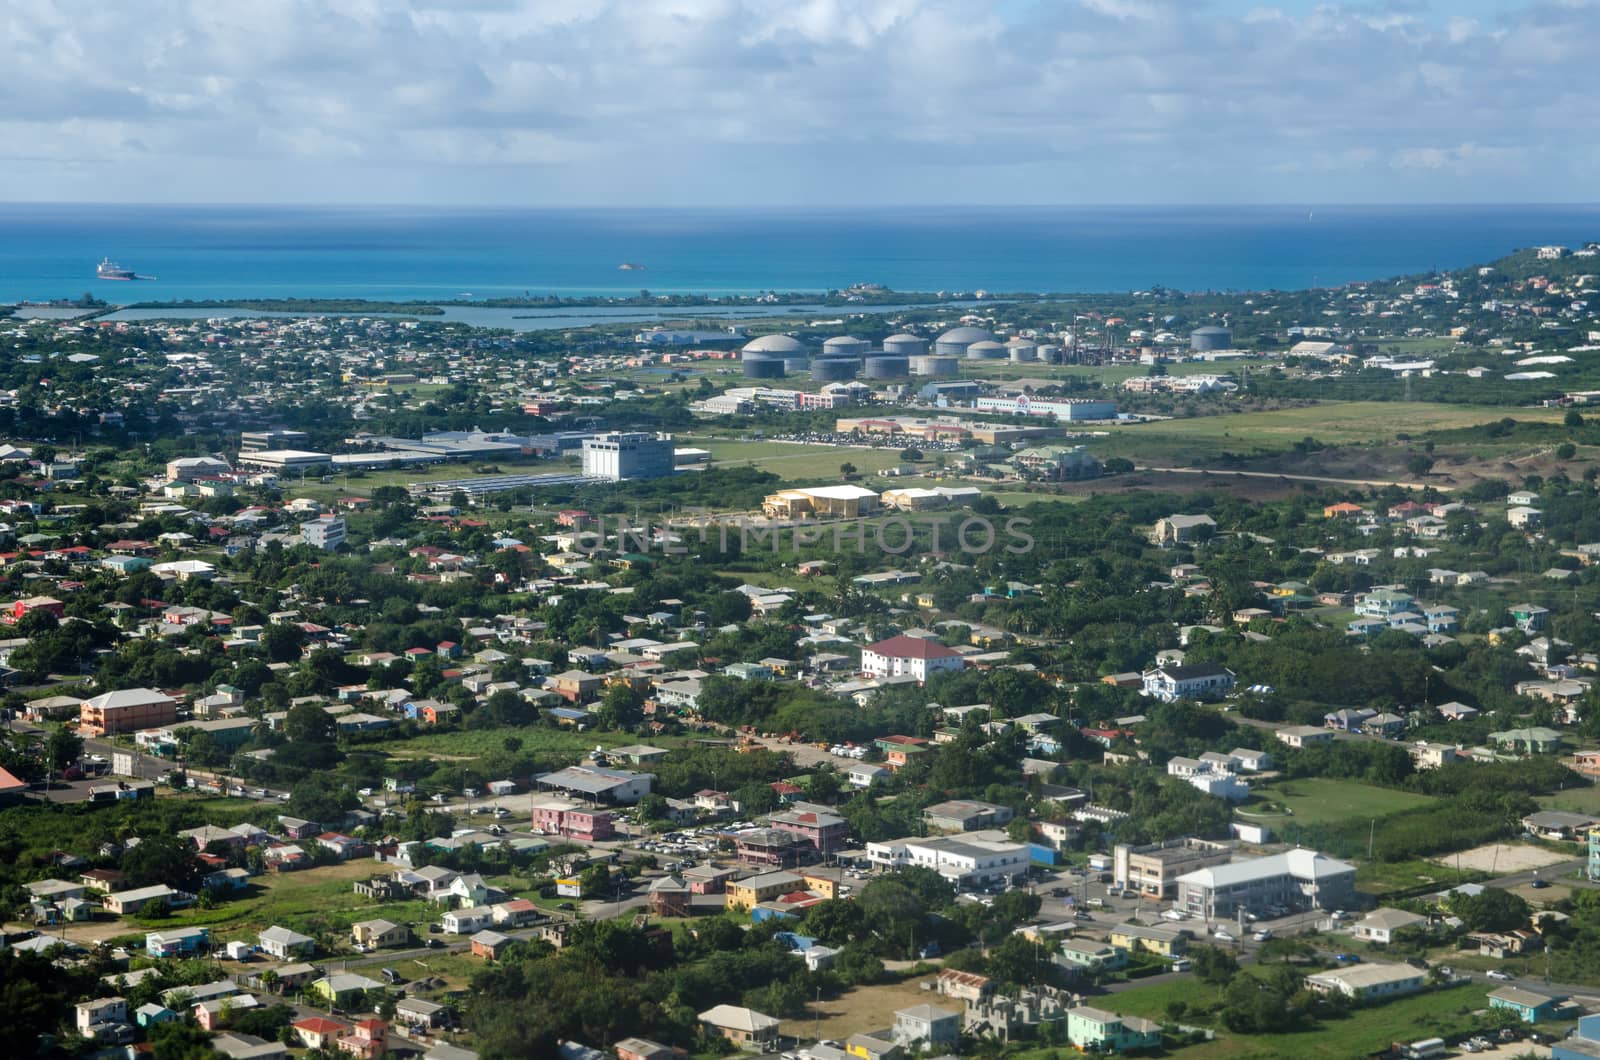 Aerial view of the city of St John's, Antigua and Barbuda looking across houses towards several shopping malls and the West Indies Oil Company terminal and the Caribbean Sea beyond on a sunny January day.